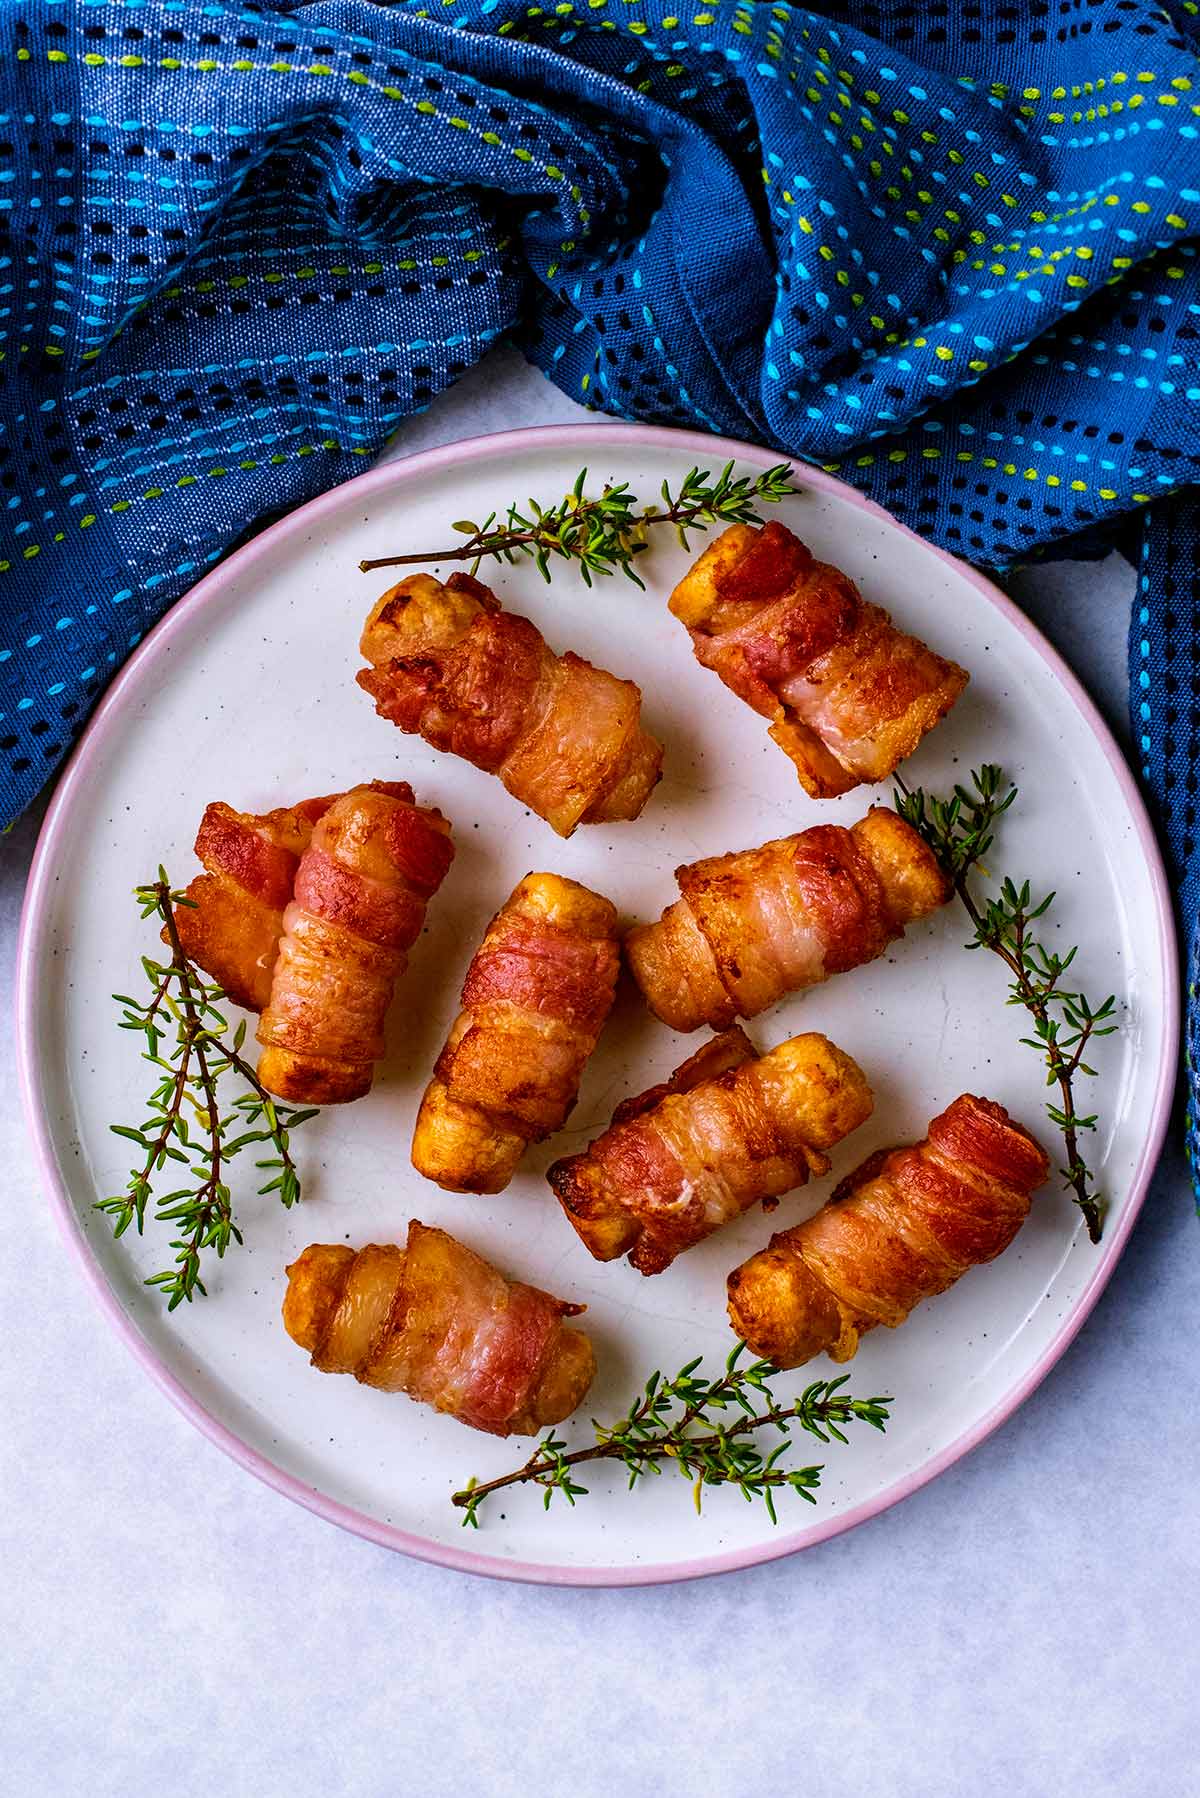 A plate of pigs in blankets with some sprigs of thyme.